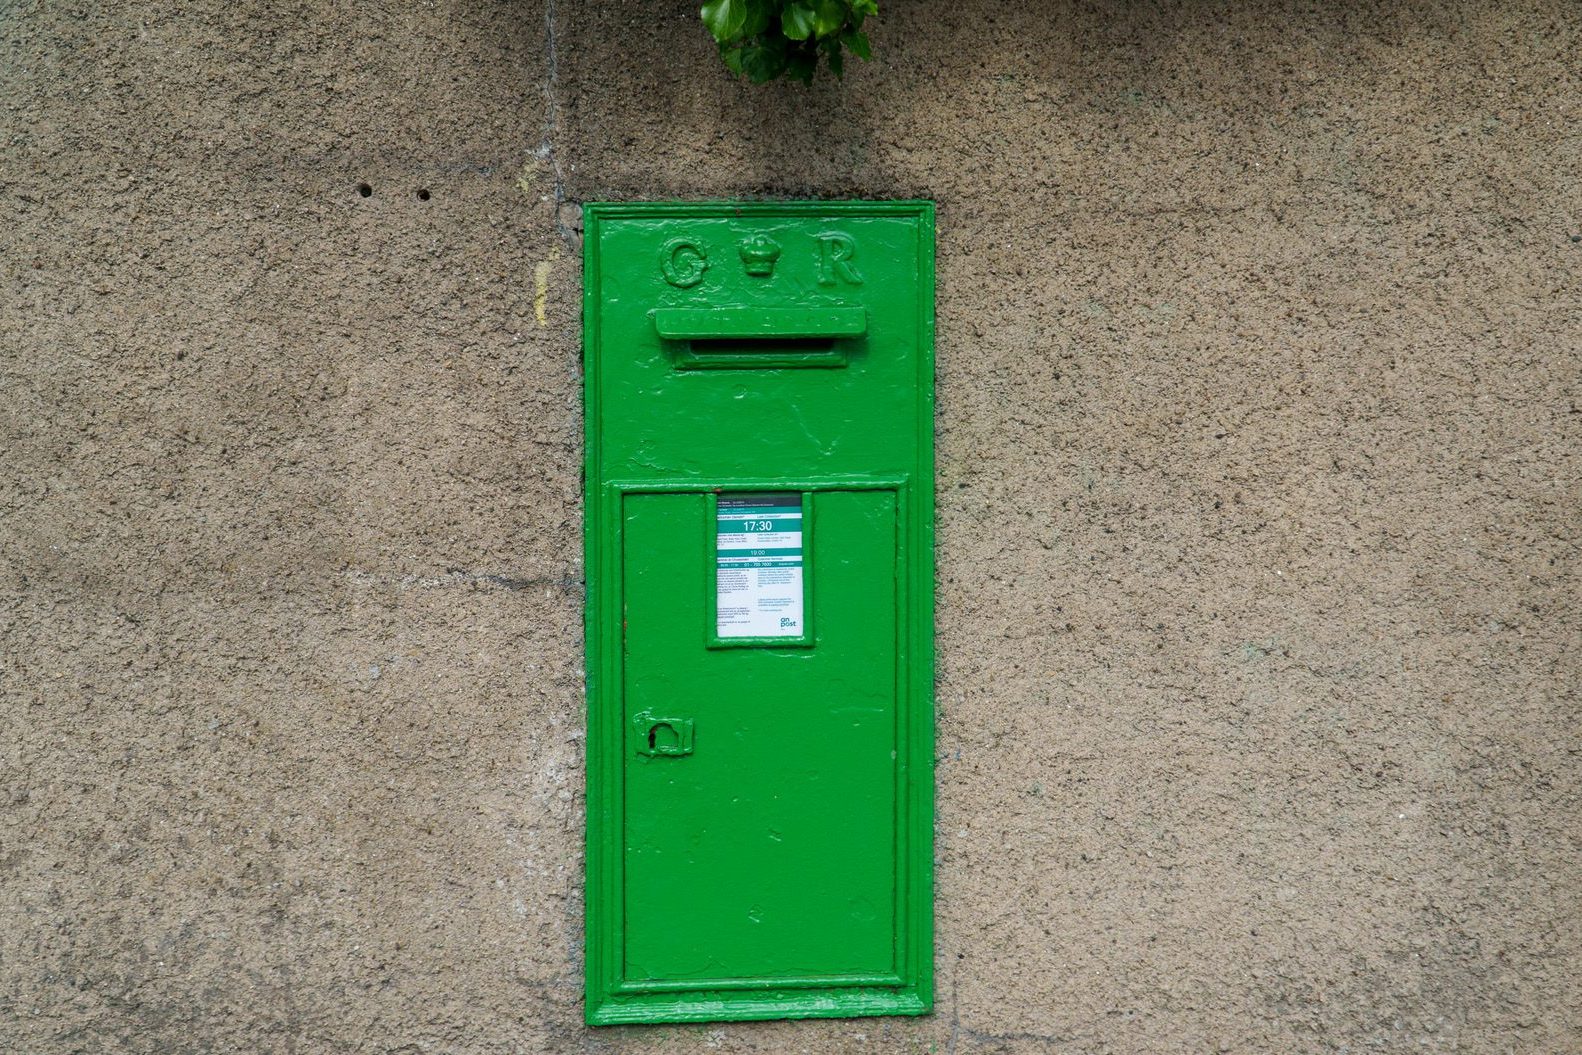 KING GEORGE WALL MOUNTED LETTER BOX [SILCHESTER ROAD IN GLENAGEARY]